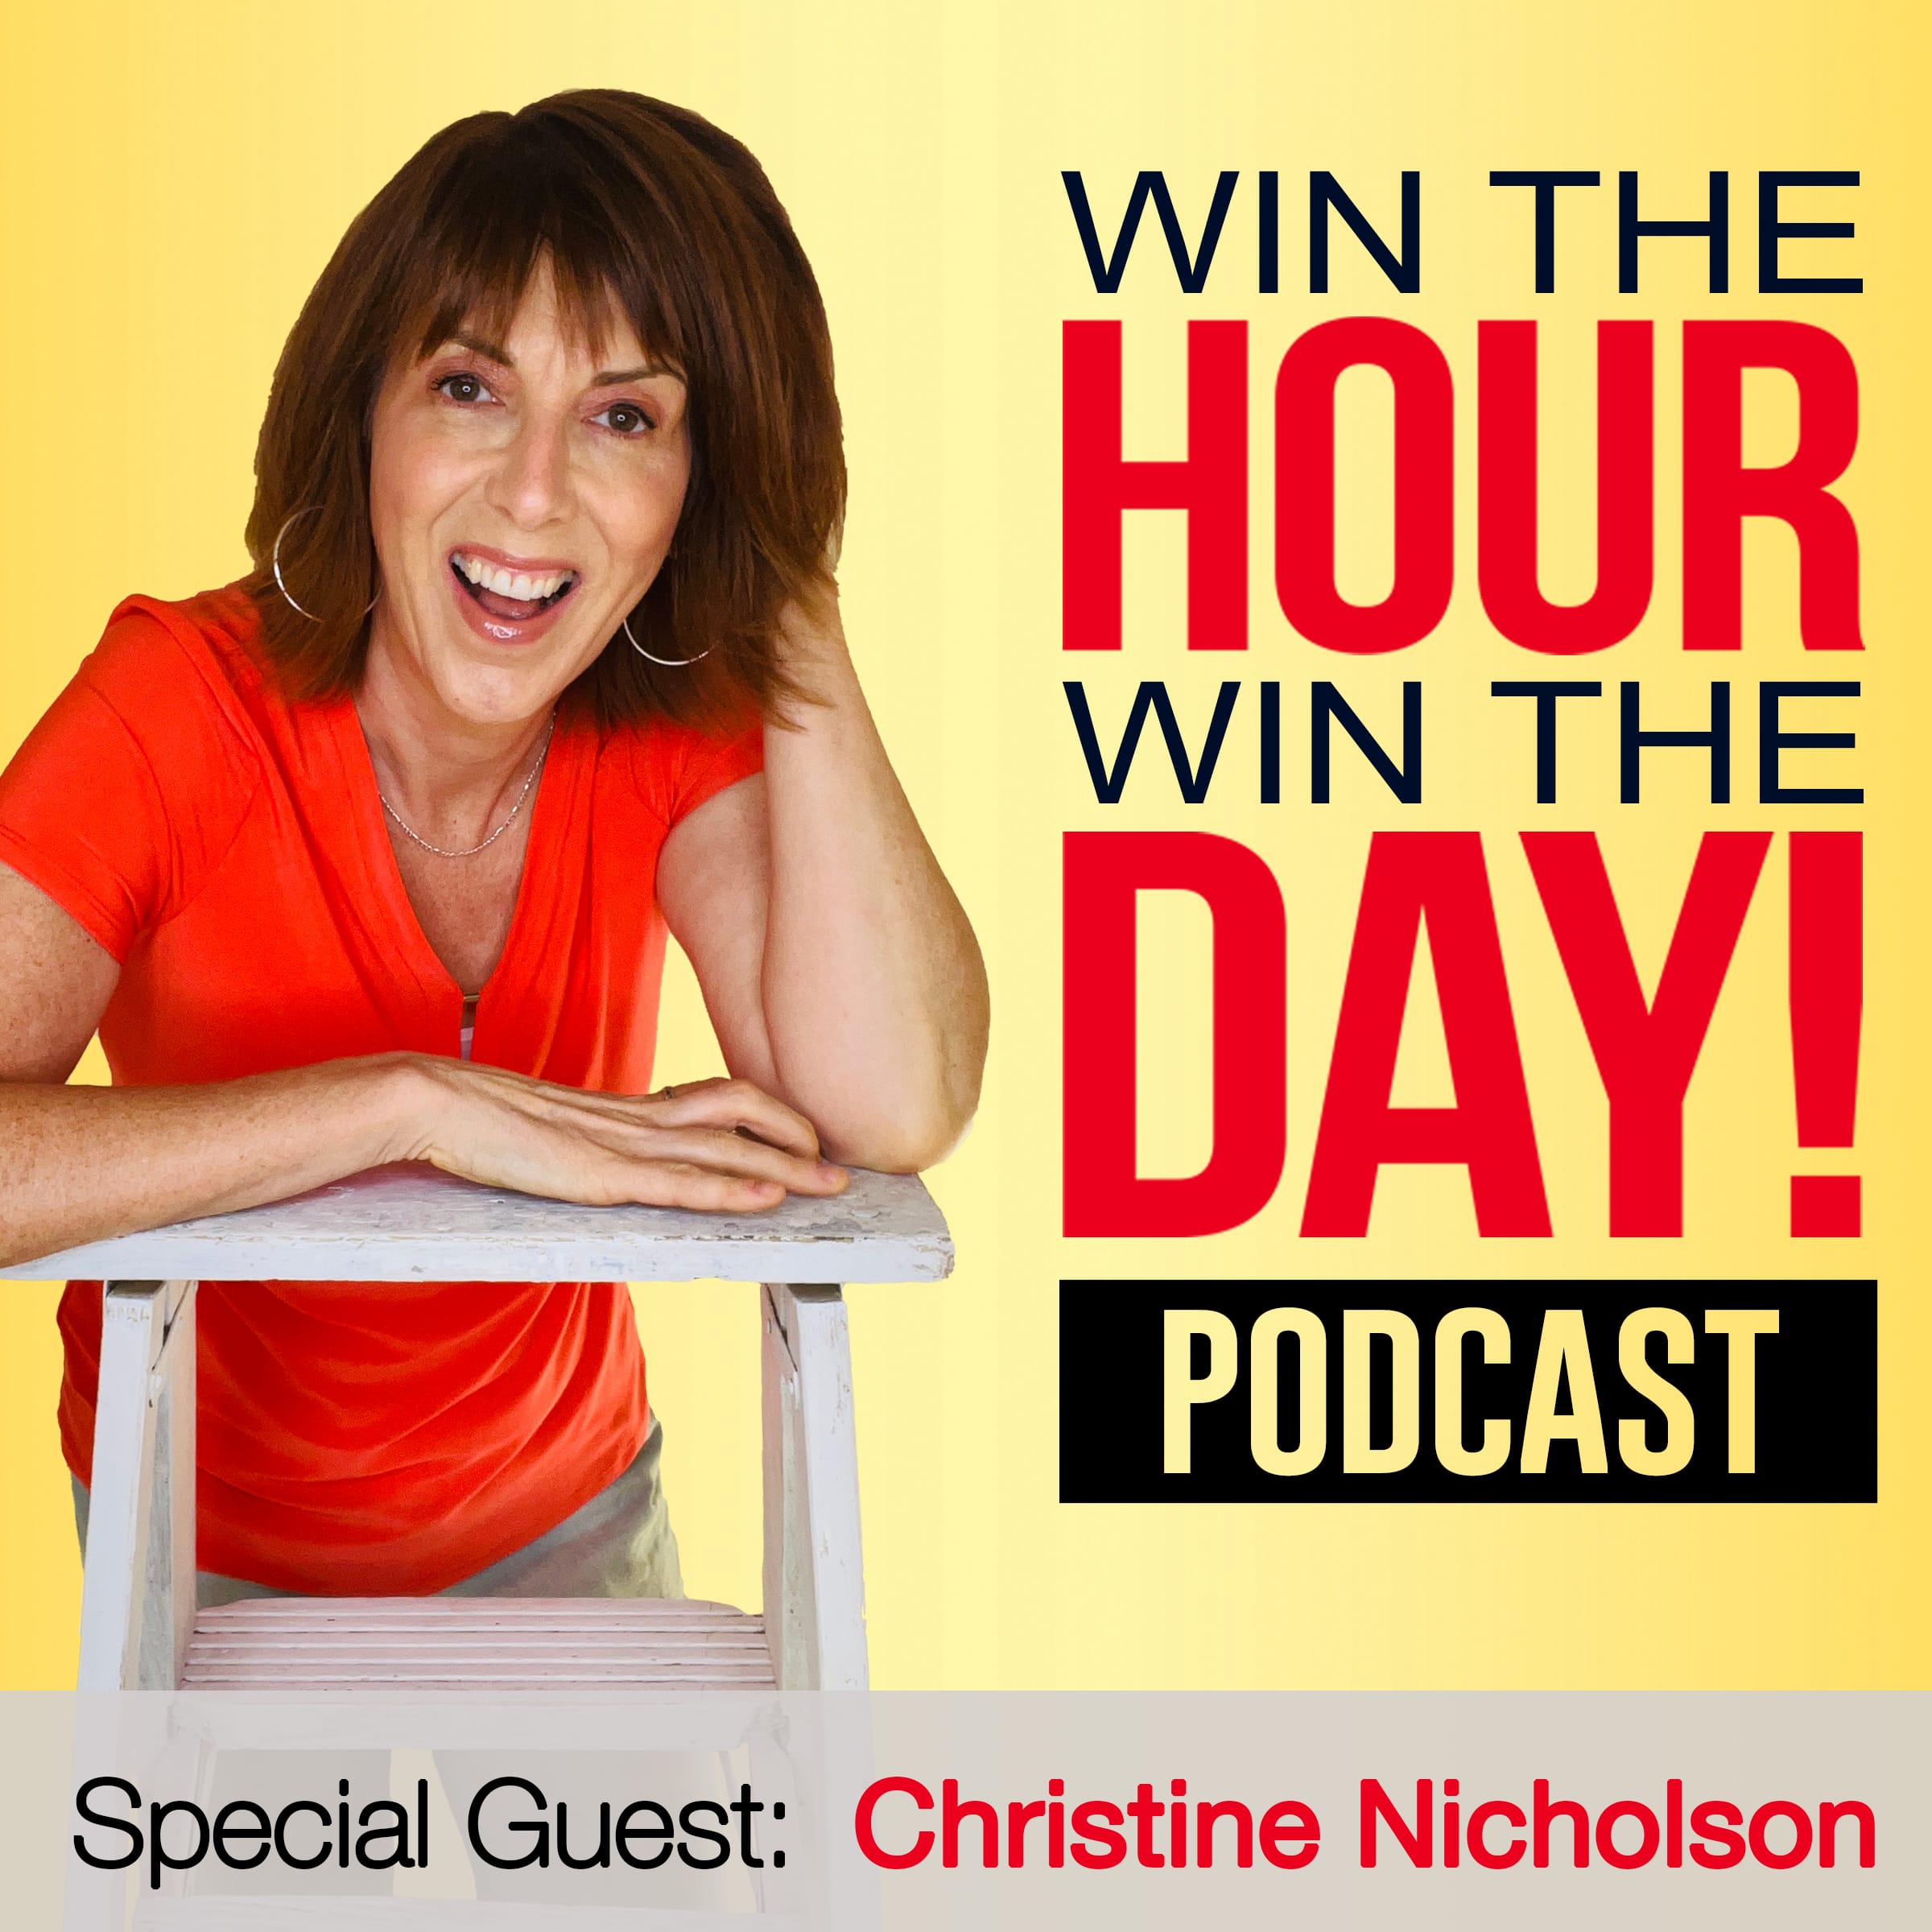 How To Triple Your Income For 20 Hours A Week with Christine Nicholson